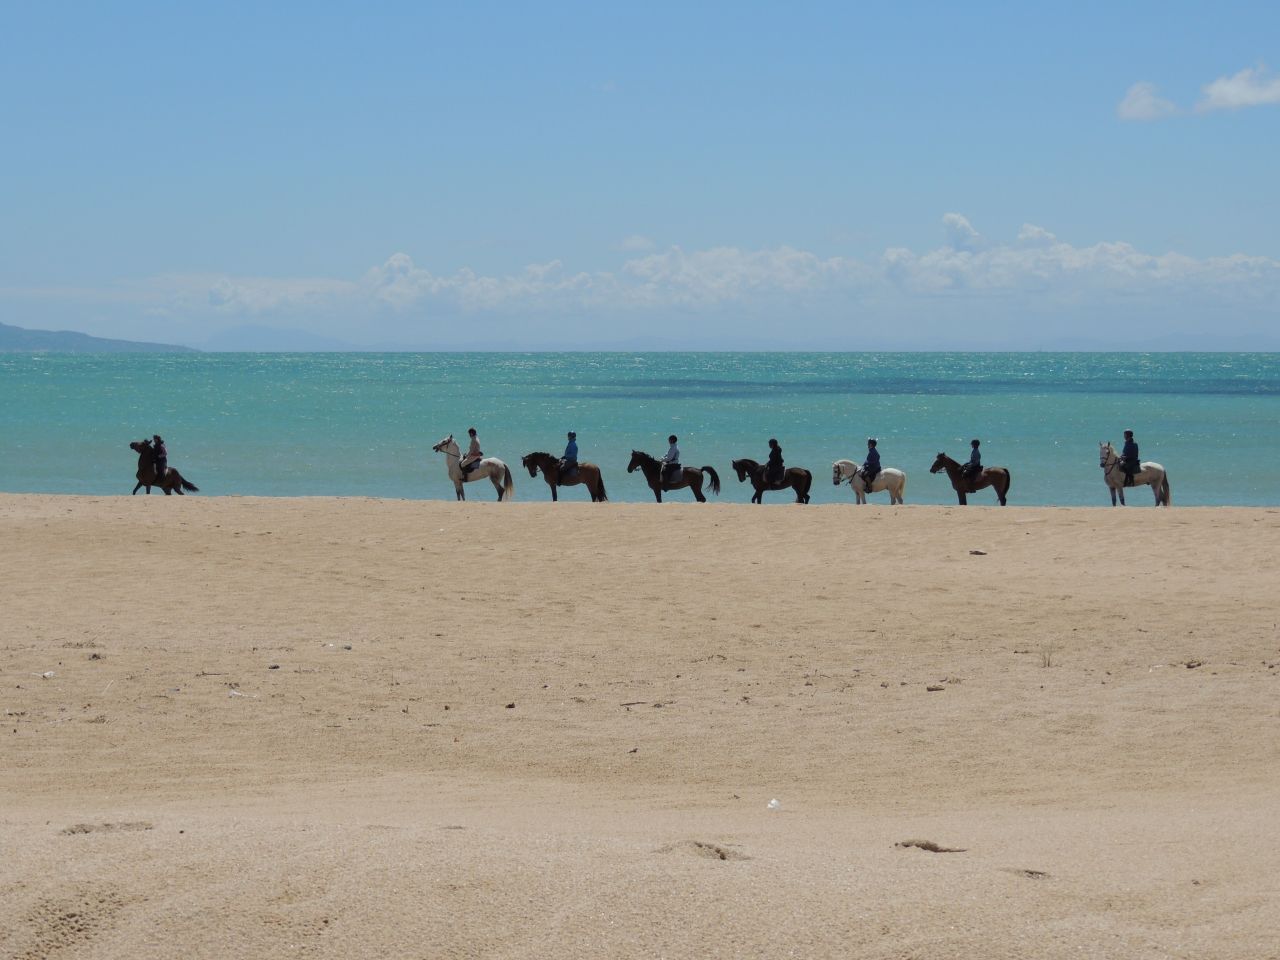 If lying on a beach doesn't appeal, then why not try riding along one? Fantasia Adventure Holidays offers treks for experienced riders from its base in the province of Cadiz.